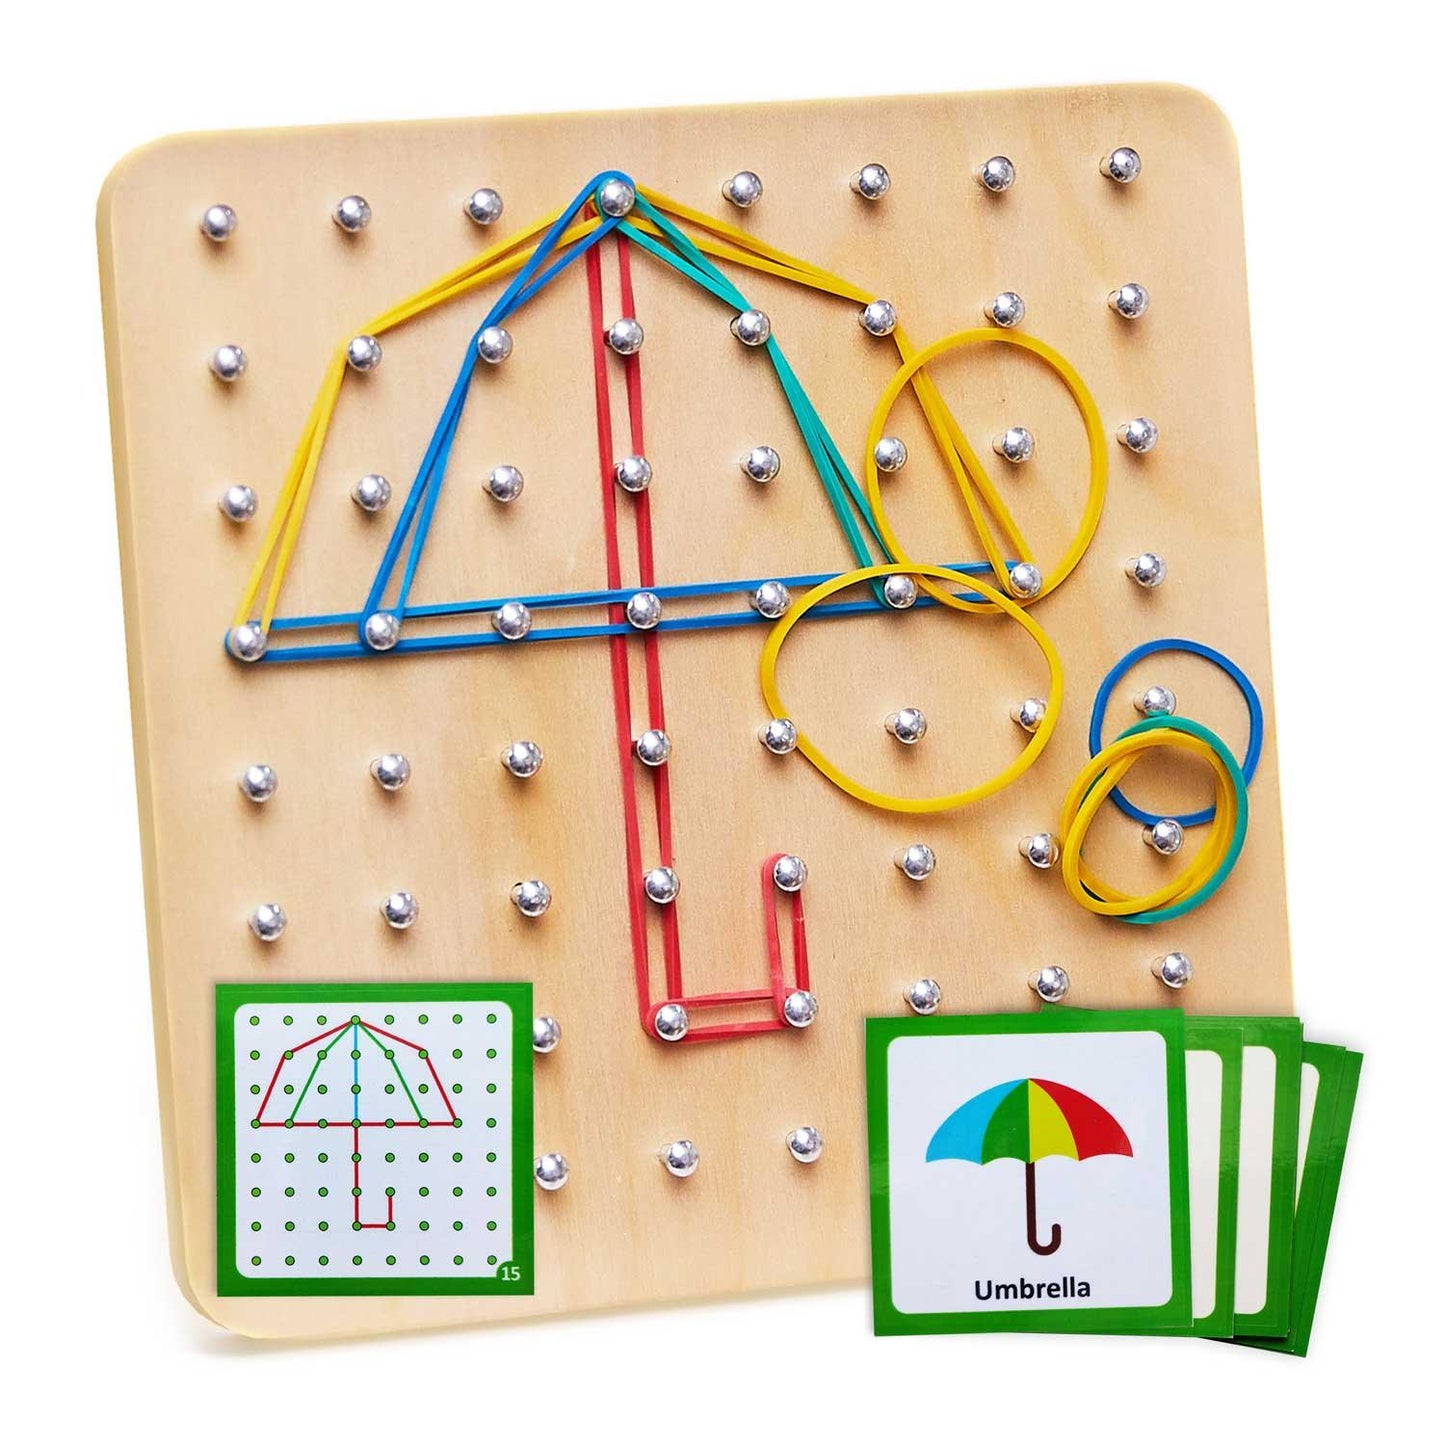 Stem Rubber Band pattern Board Game